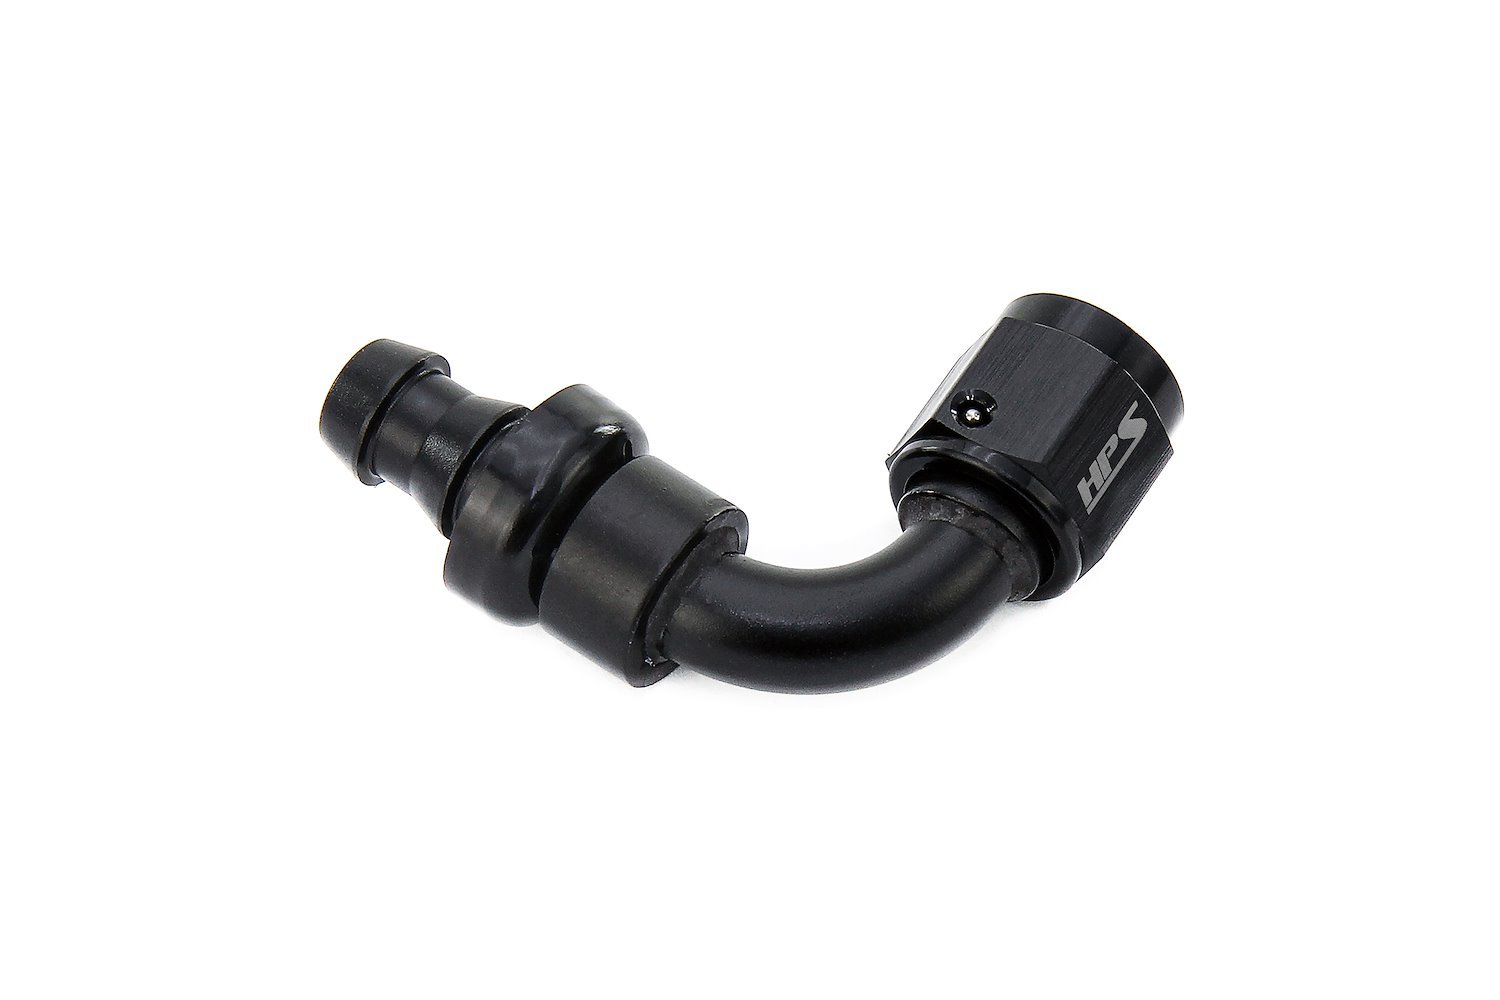 150-6006 150 Series 60-Deg Hose End, Tool-Free Assembly Hose Ends, For Push-On Style Hoses, Easy To Use